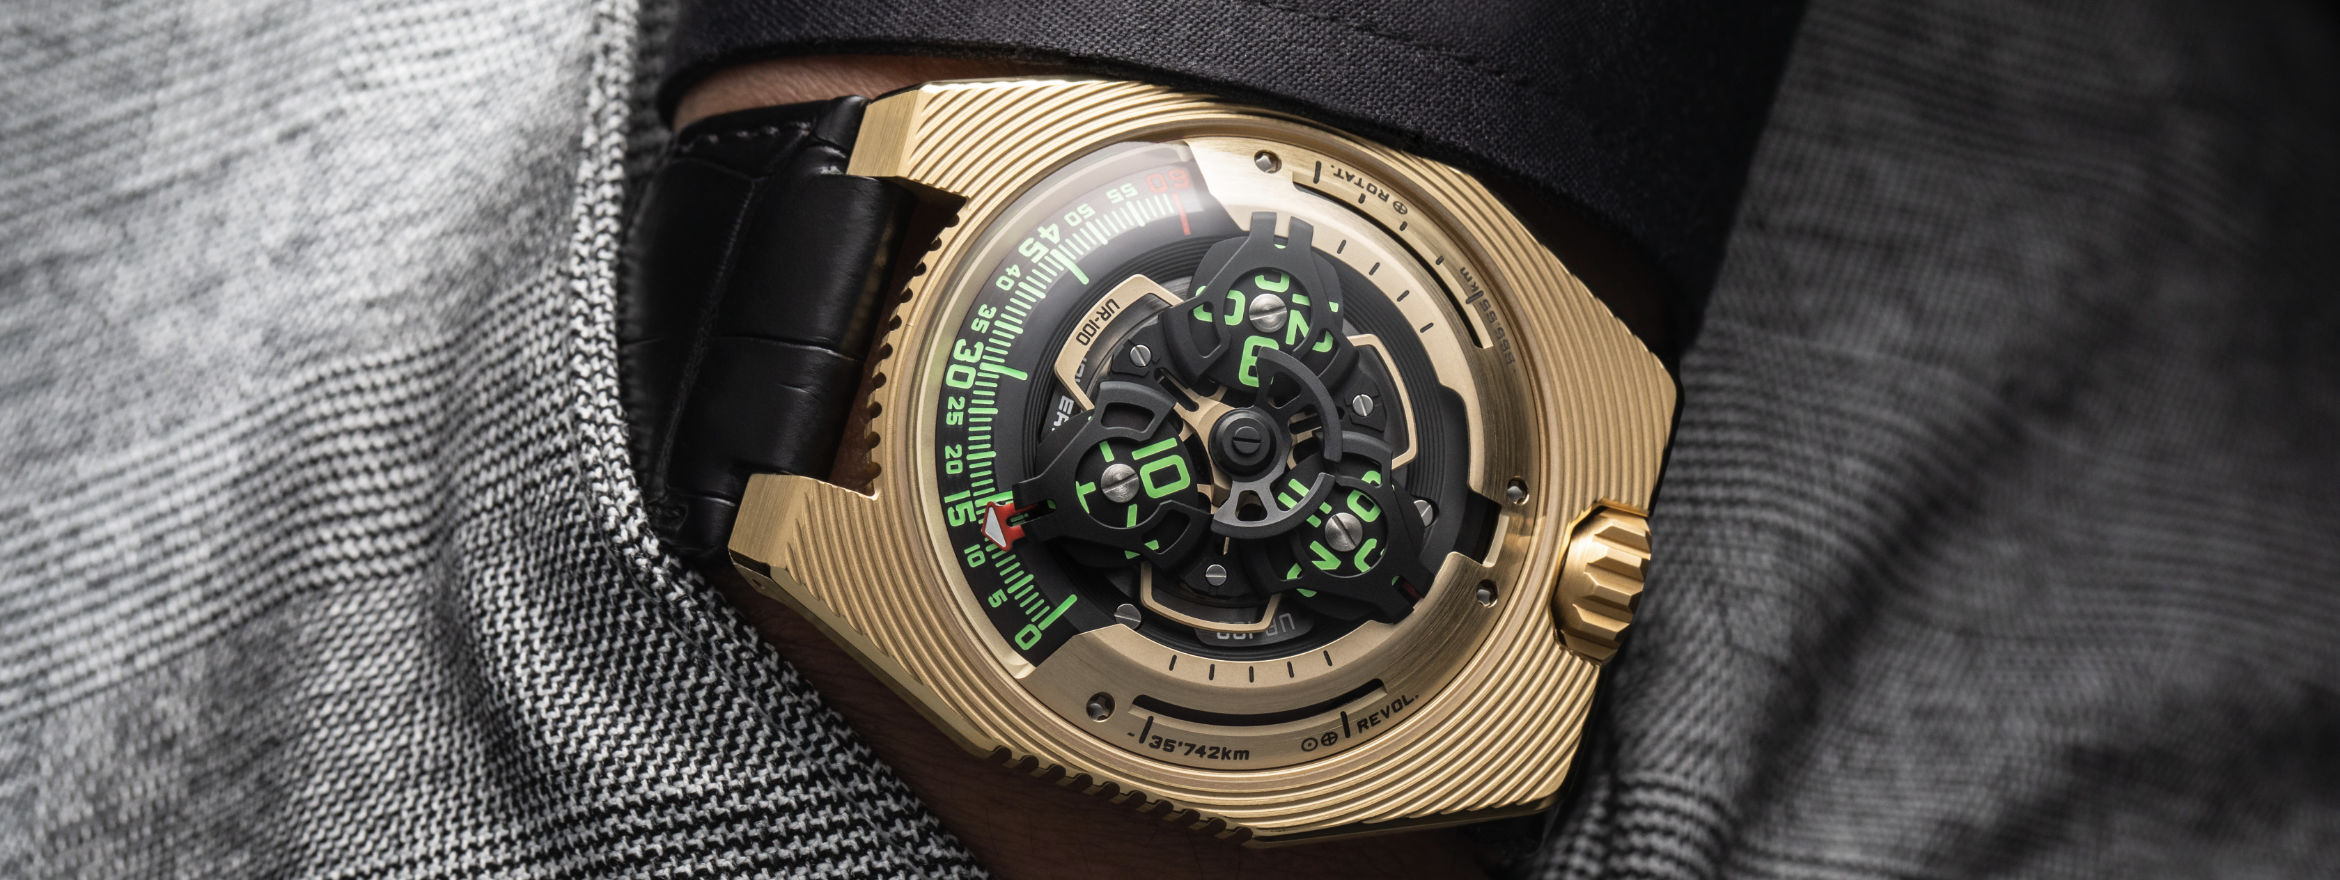 Urwerk Harnesses The Sun With The UR-100 Electrum